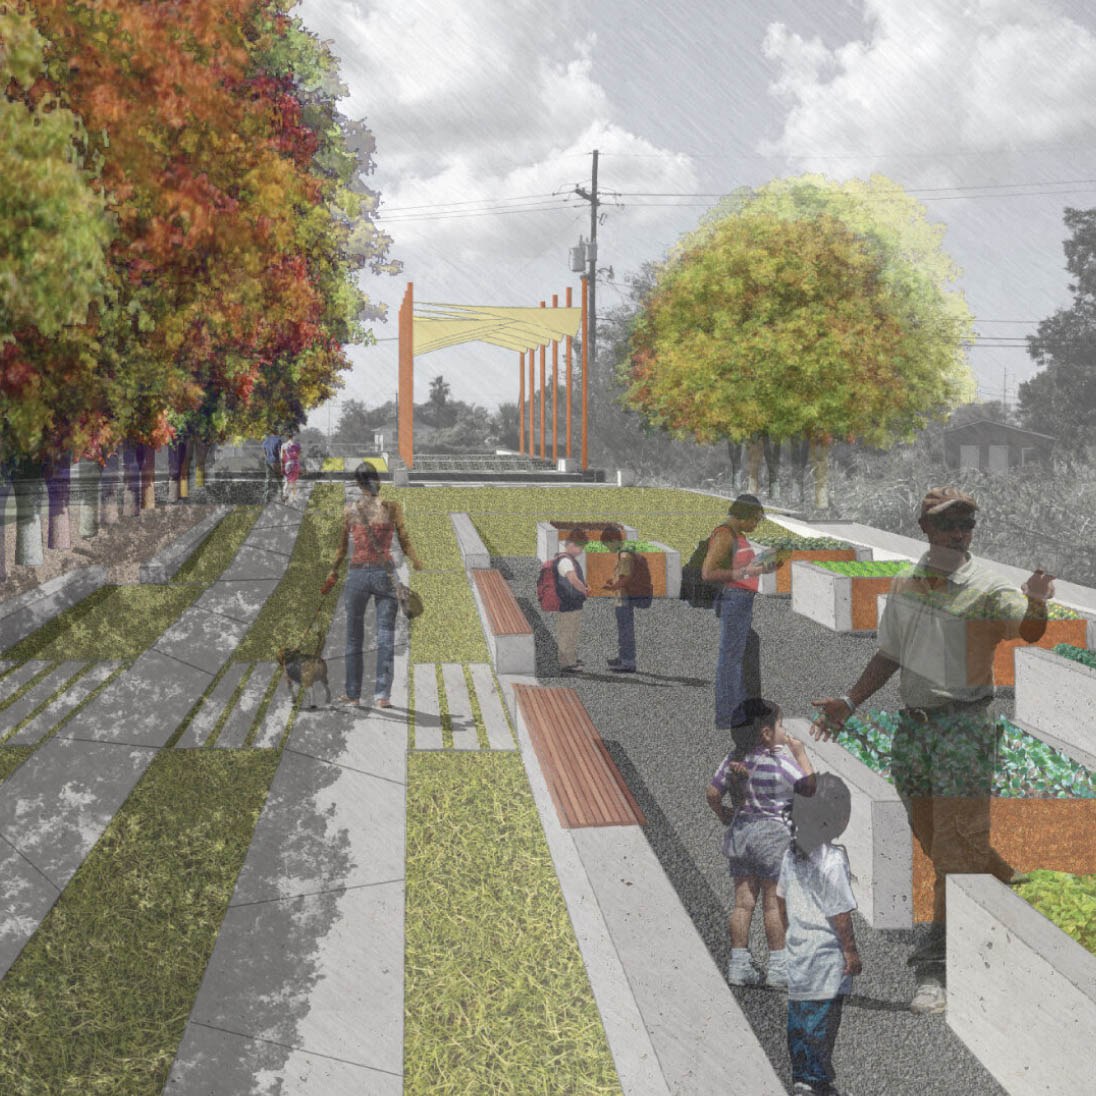 Rendering of the Hollygrove Greenline